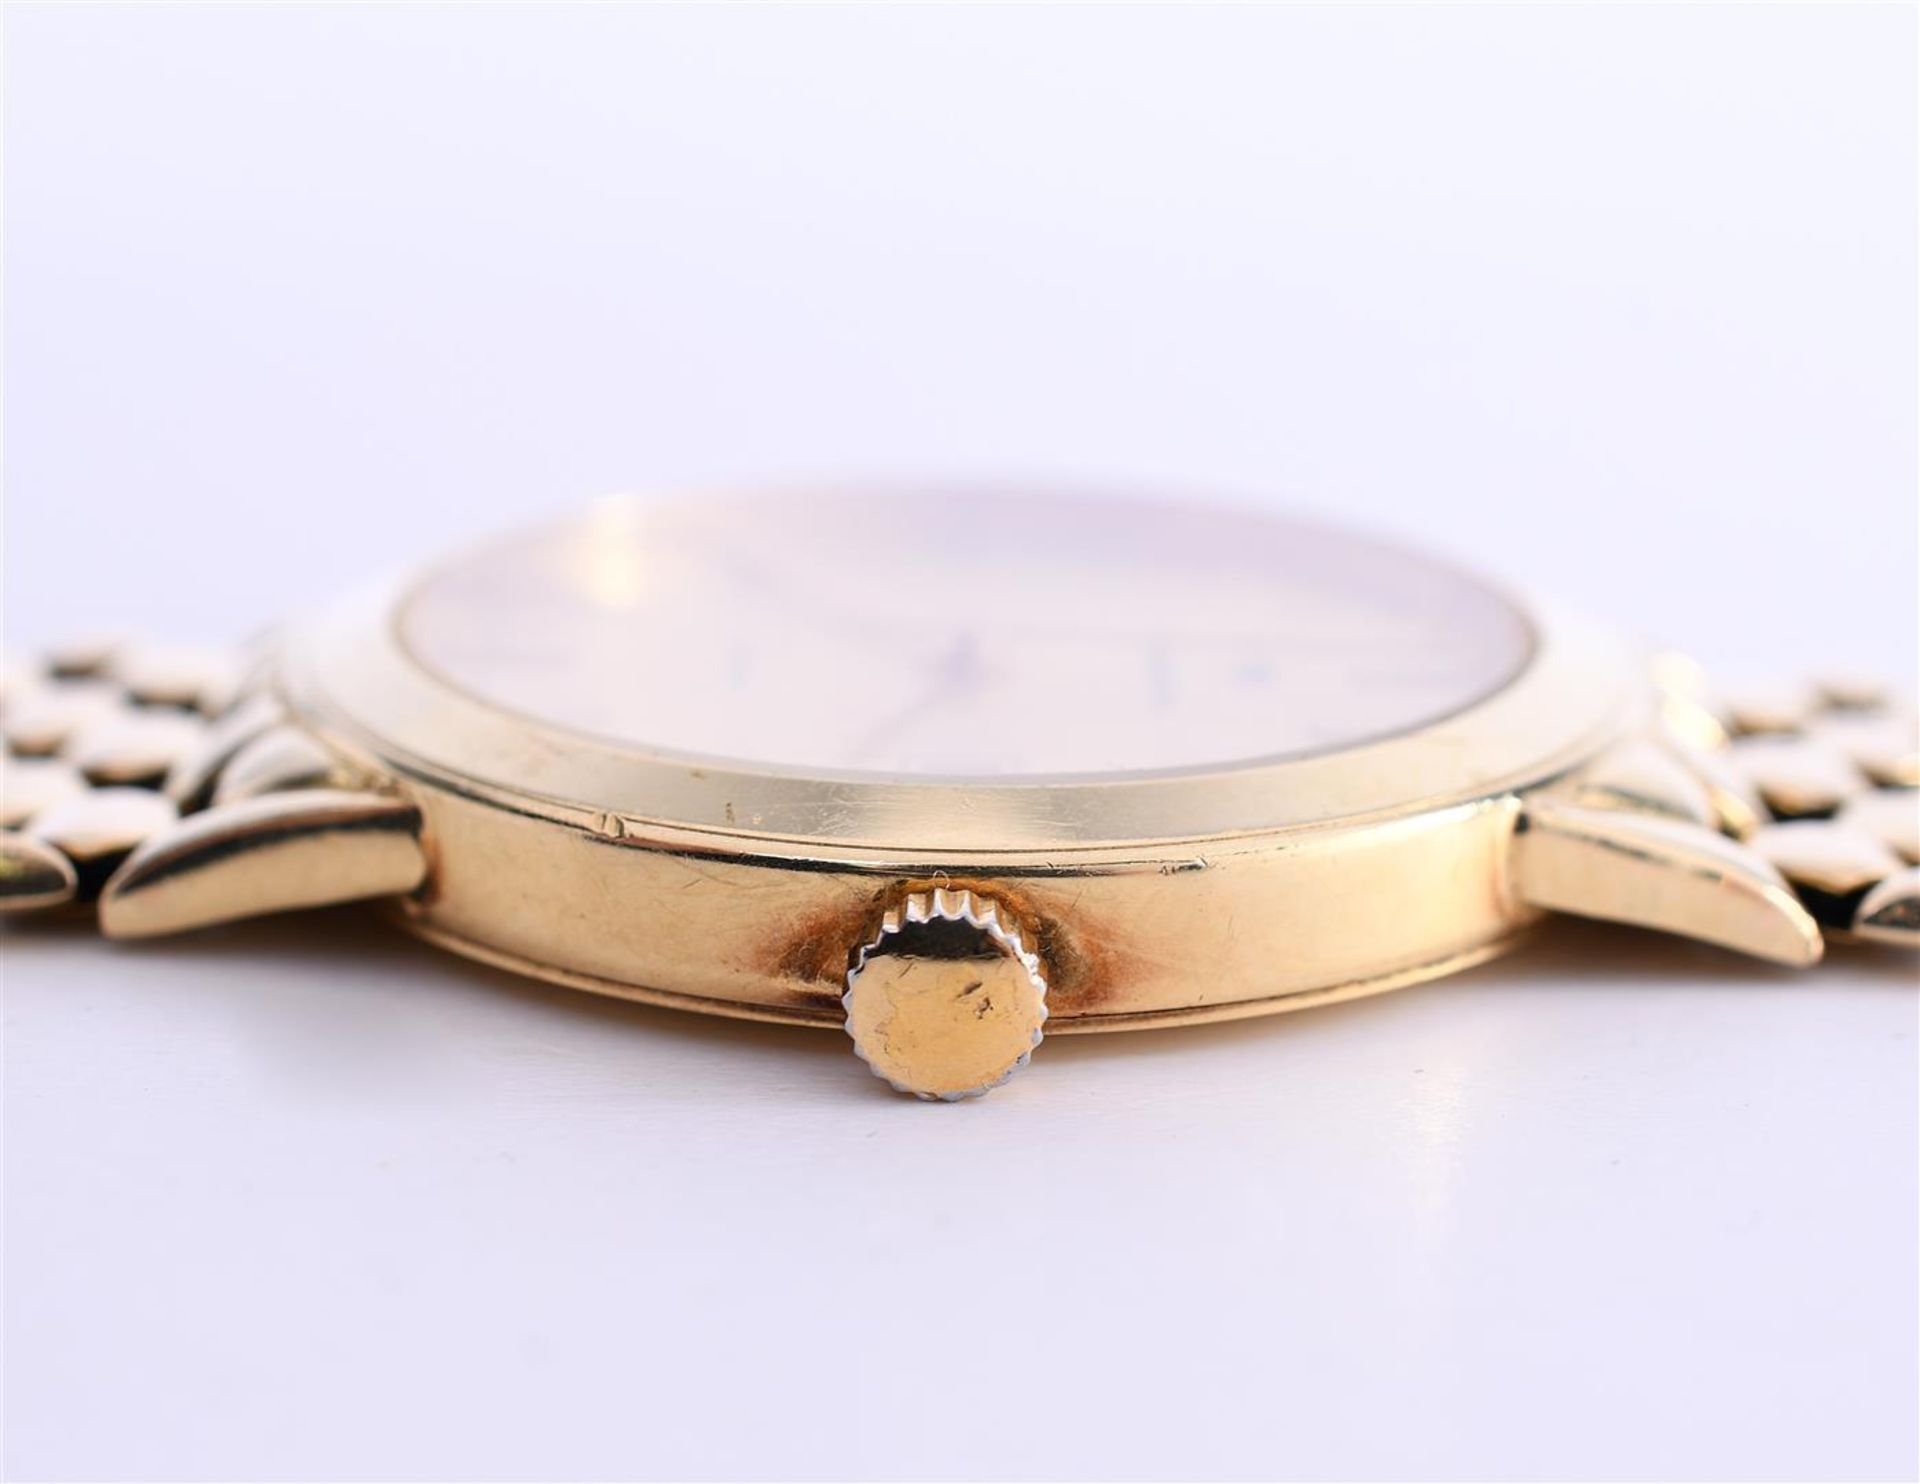 14 kt yellow gold Bernard Piot men's wristwatch with a round case and a gold-colored dial  - Bild 3 aus 6